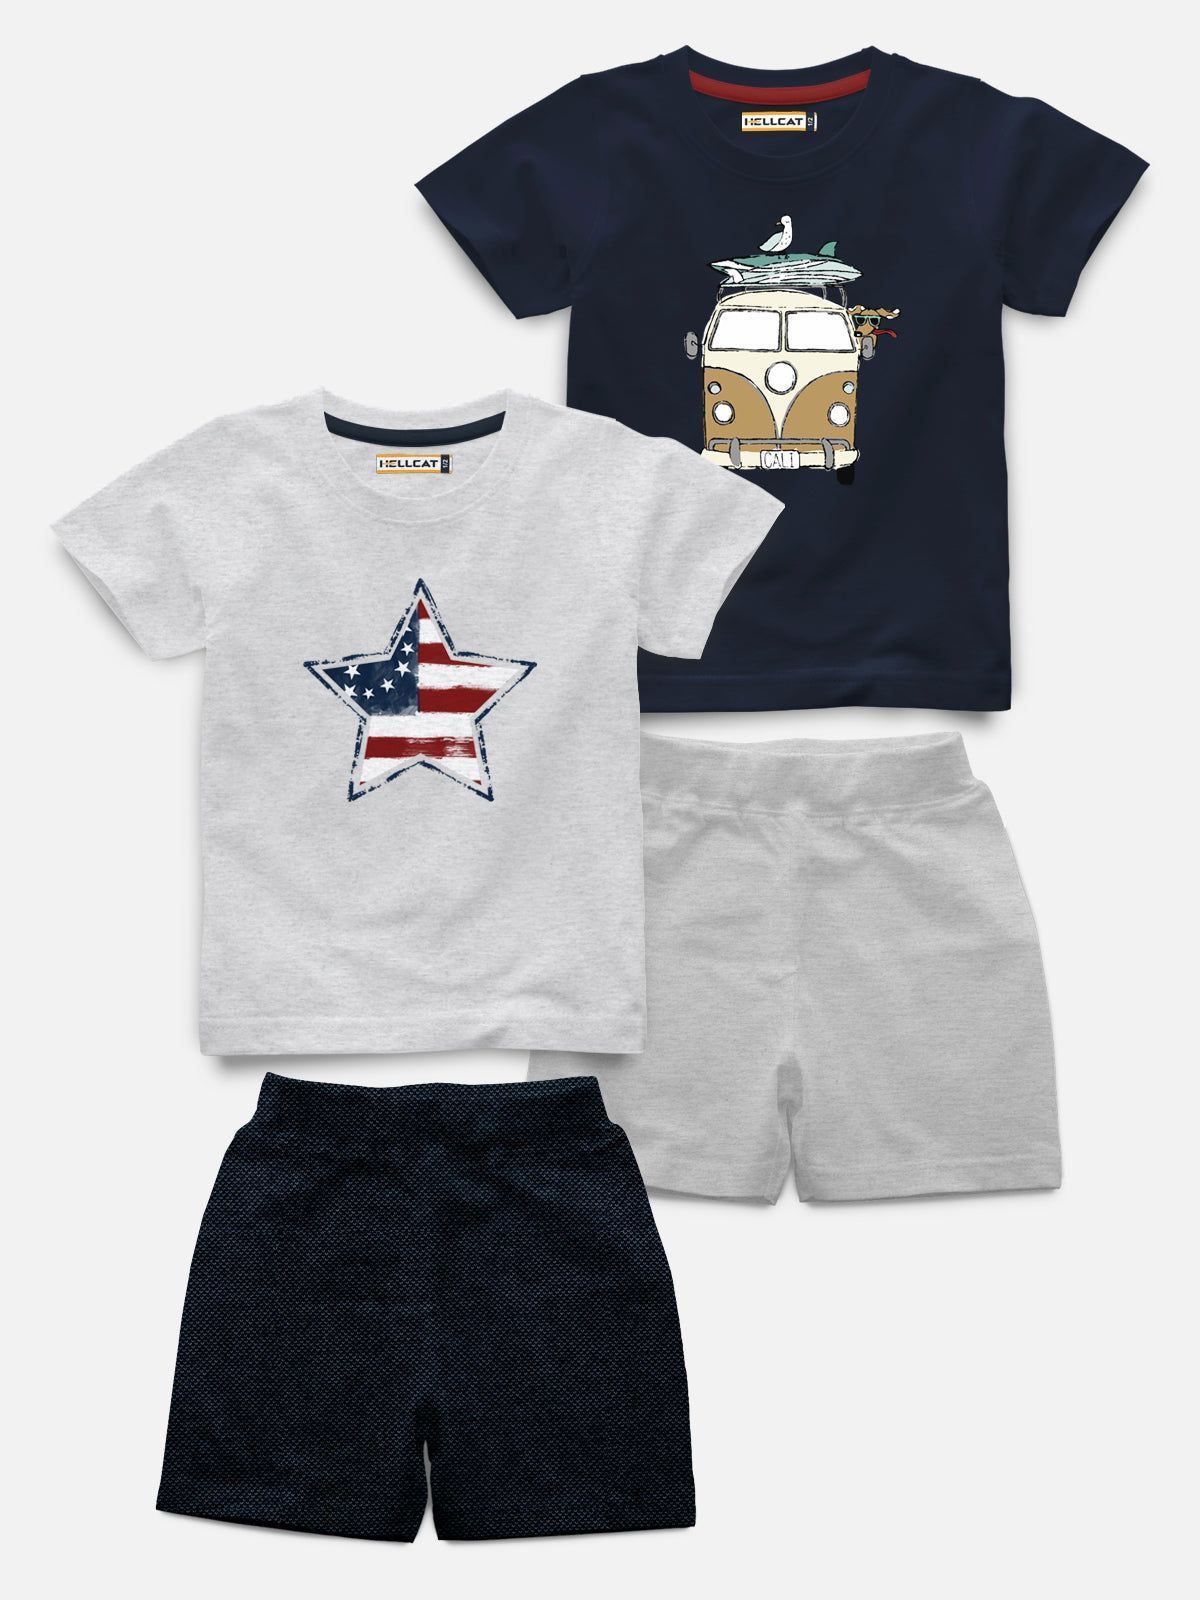 Half Sleeve Printed Tshirt with Comfy Solid Shorts for Infants & Boys - Pack of 4 (2 T-shirt & 2 short)